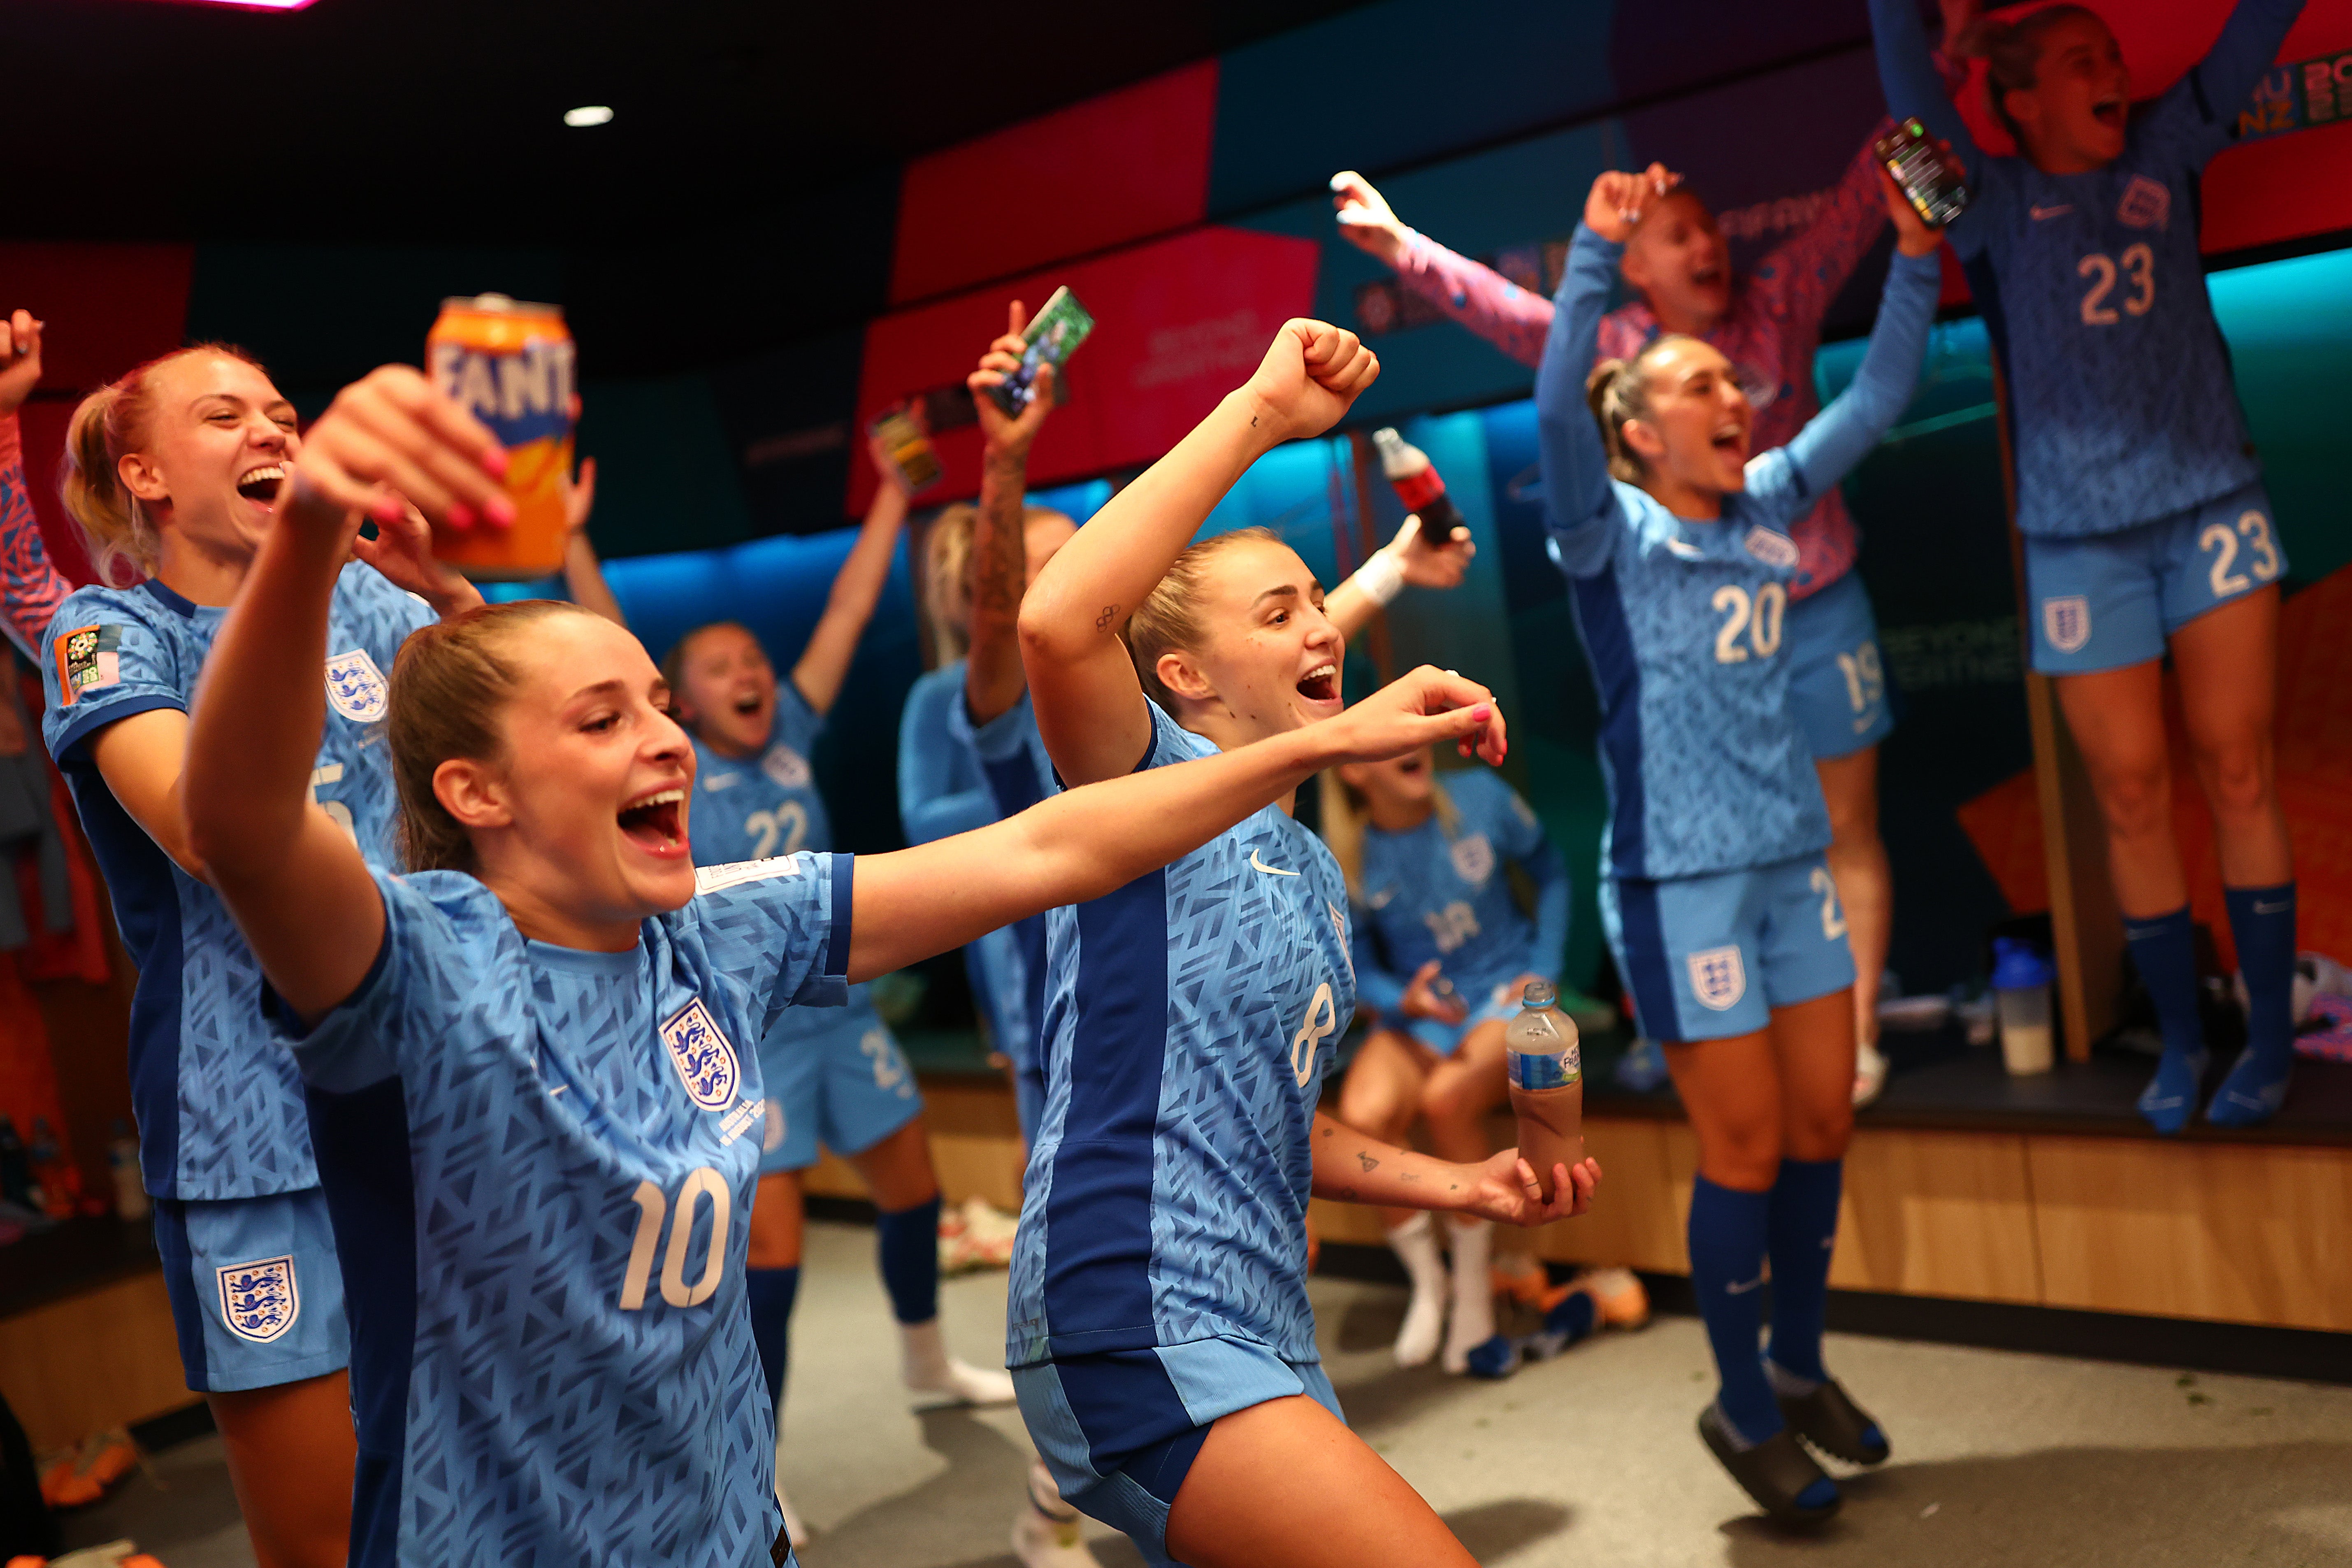 The celebrations continued when the Lionesses reached the dressing room